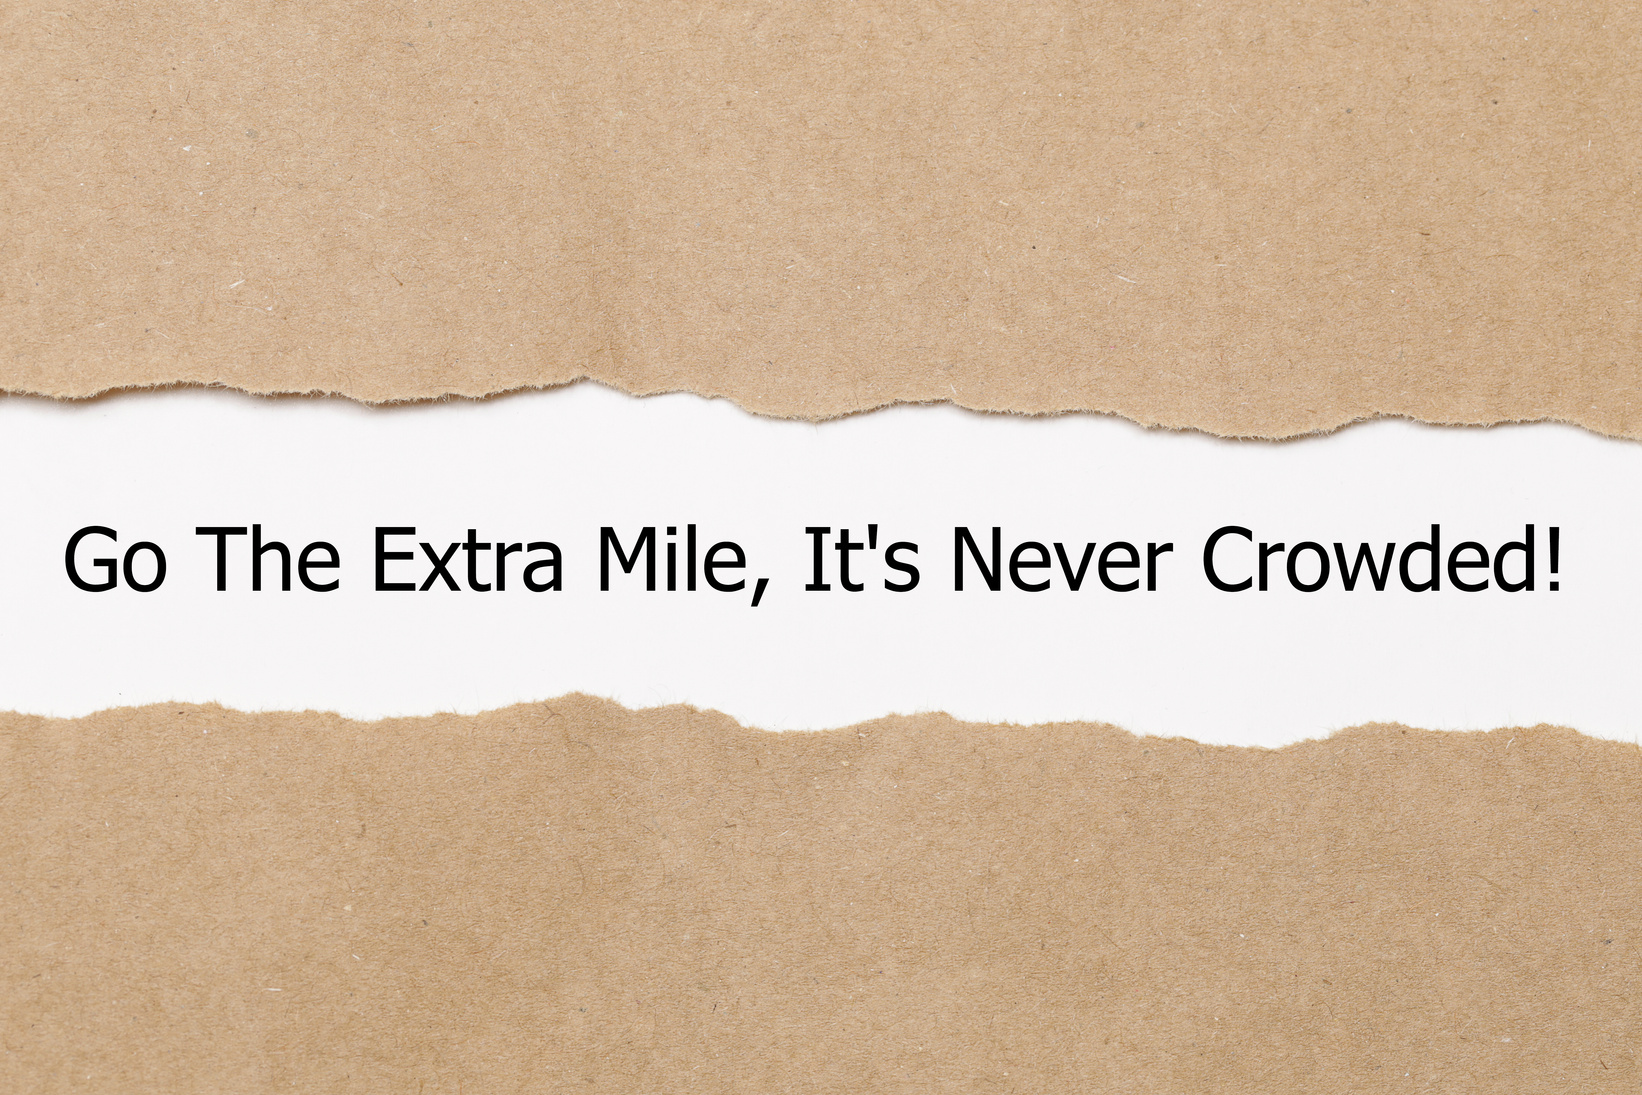 Motivational quote Go The Extra Mile It's Never Crowded appearing behind ripped paper.